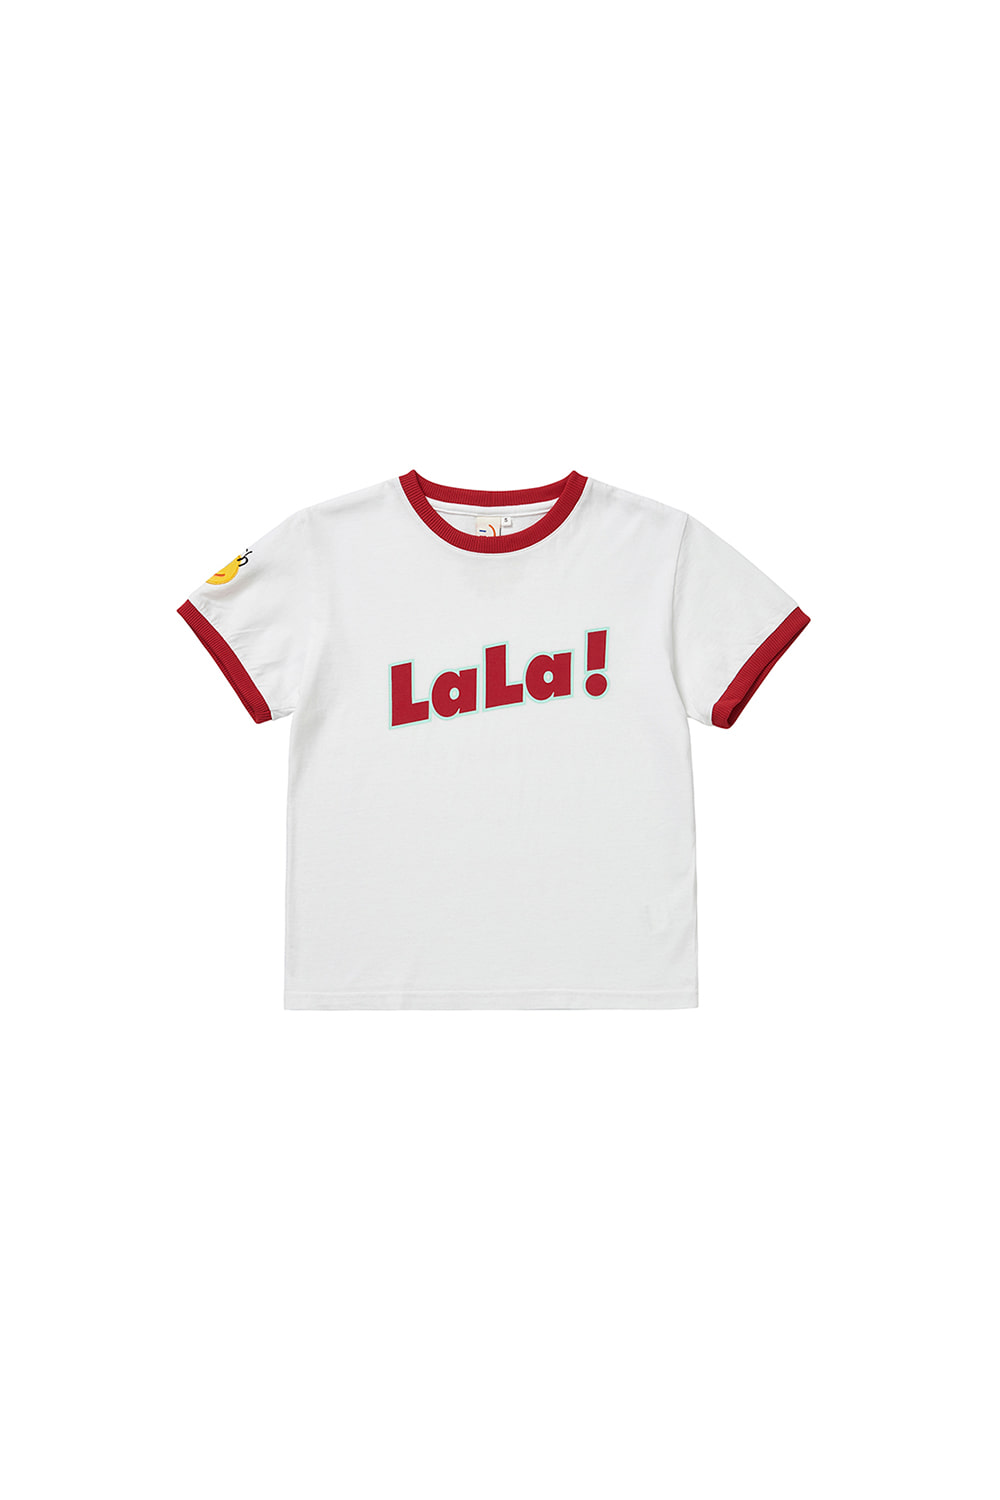 LaLa Twotone T-shirt [Red]